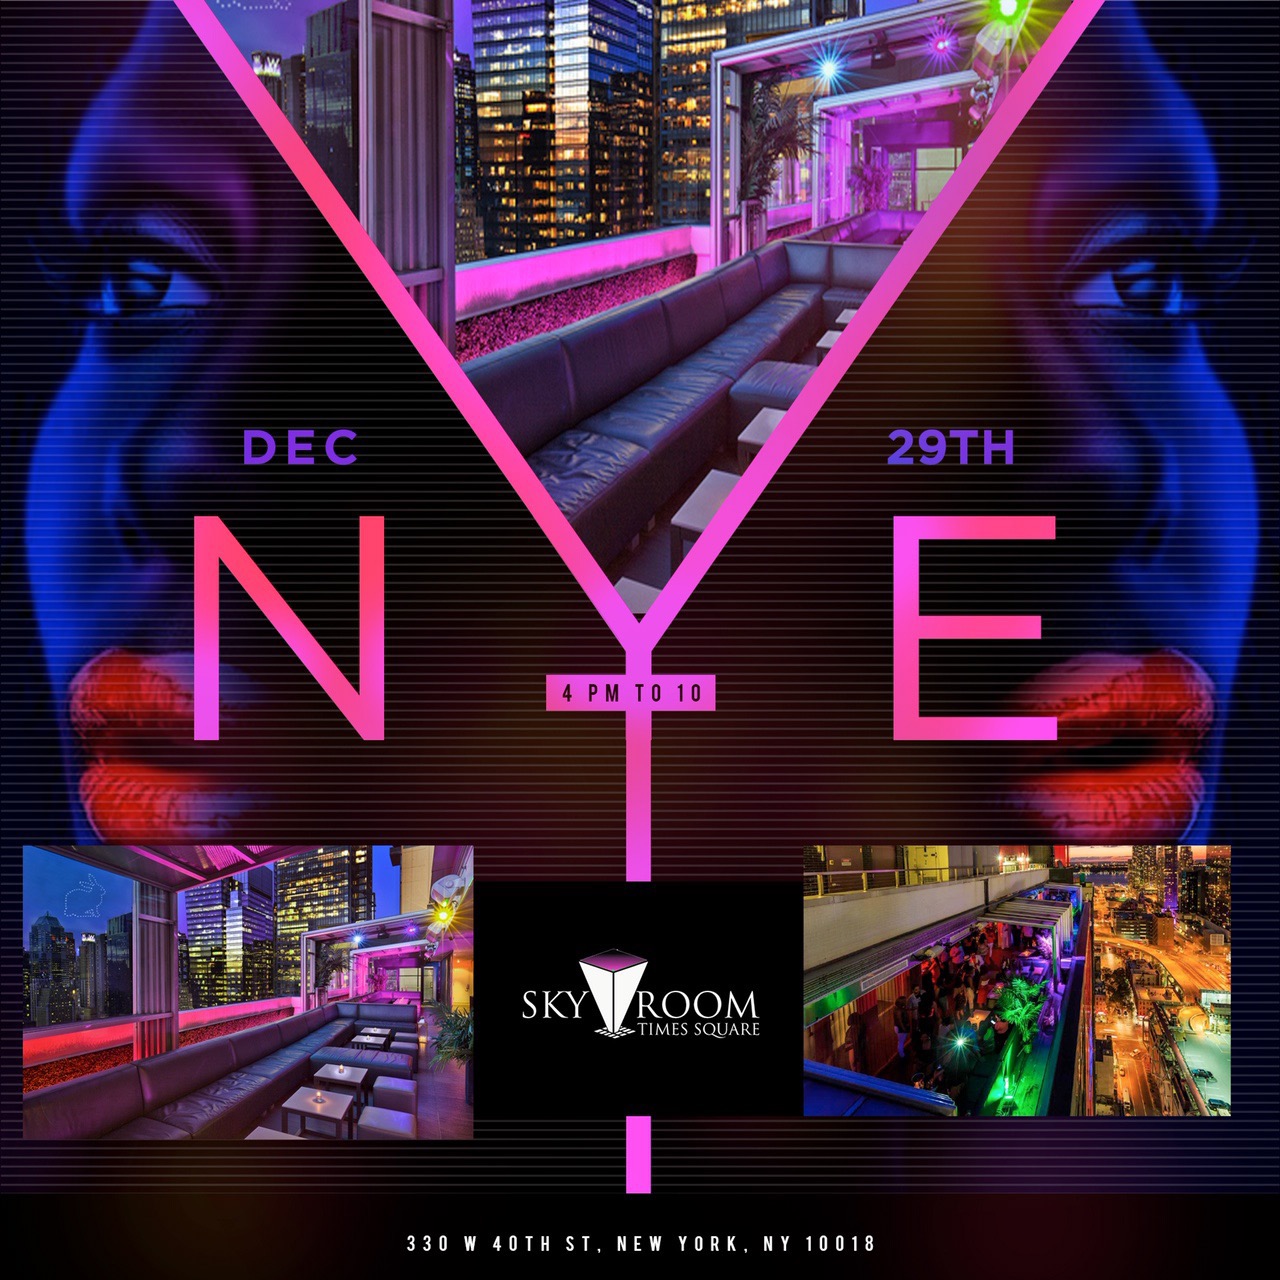 Sky High Nye Rooftop Party 2020 New York Tickets New Years